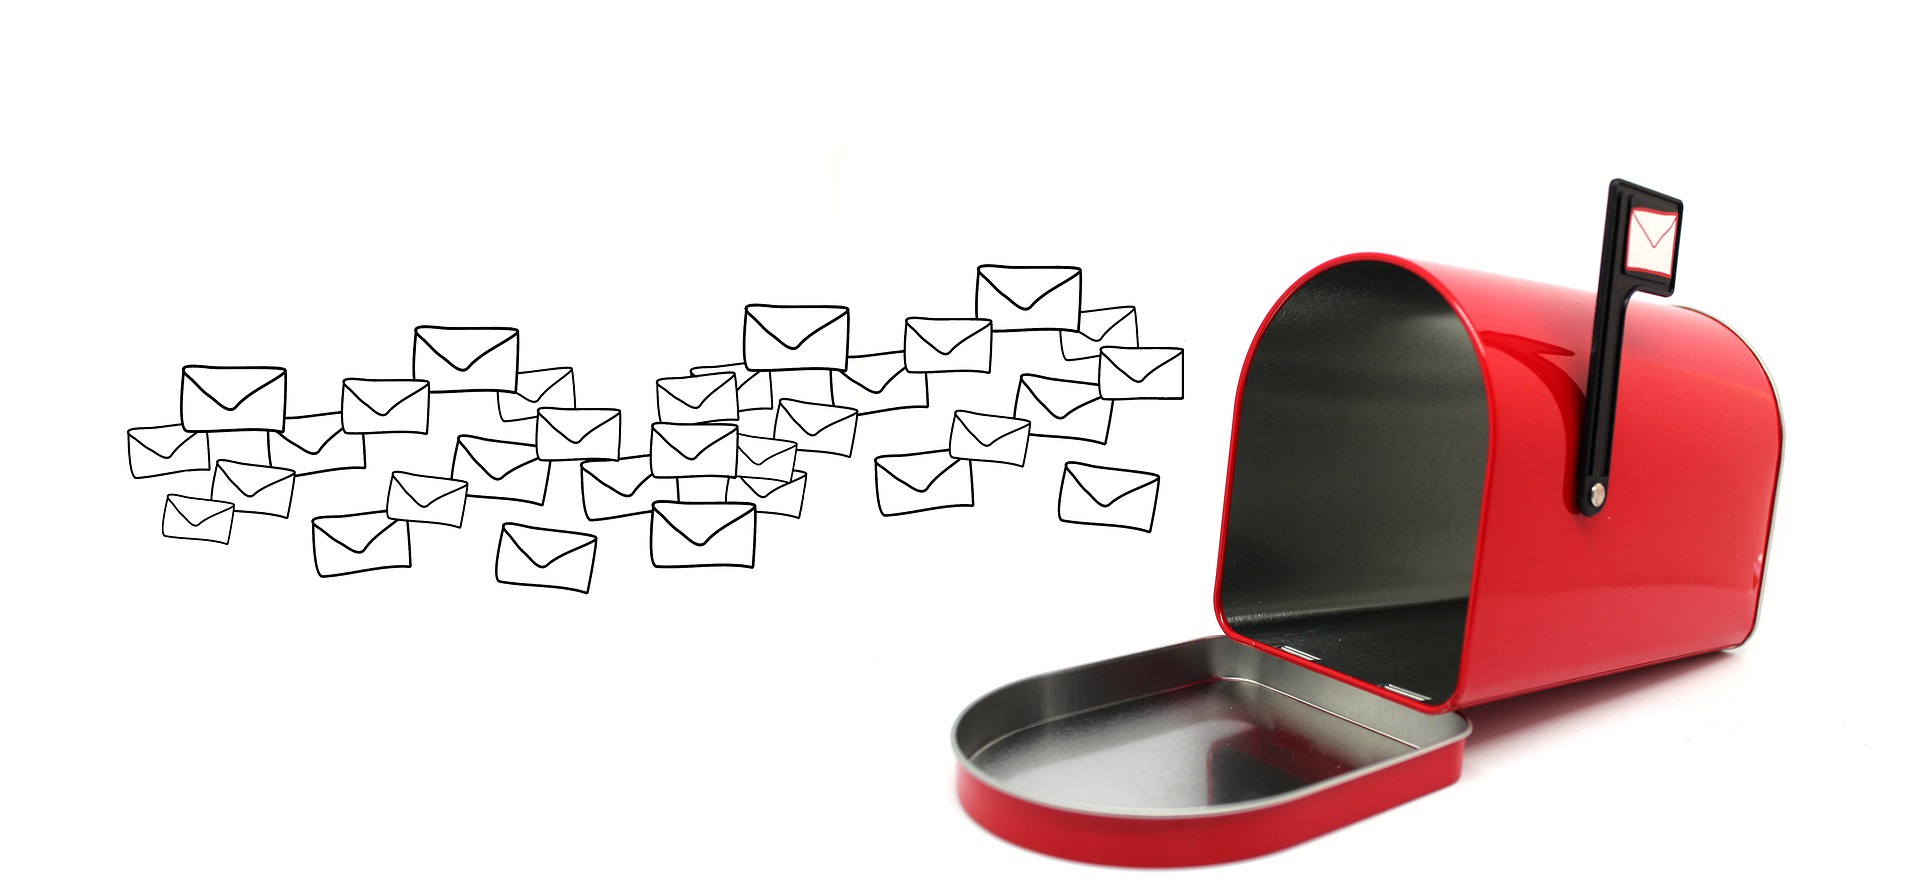 Do email marketing right in 2023 with these tips and suggestions.